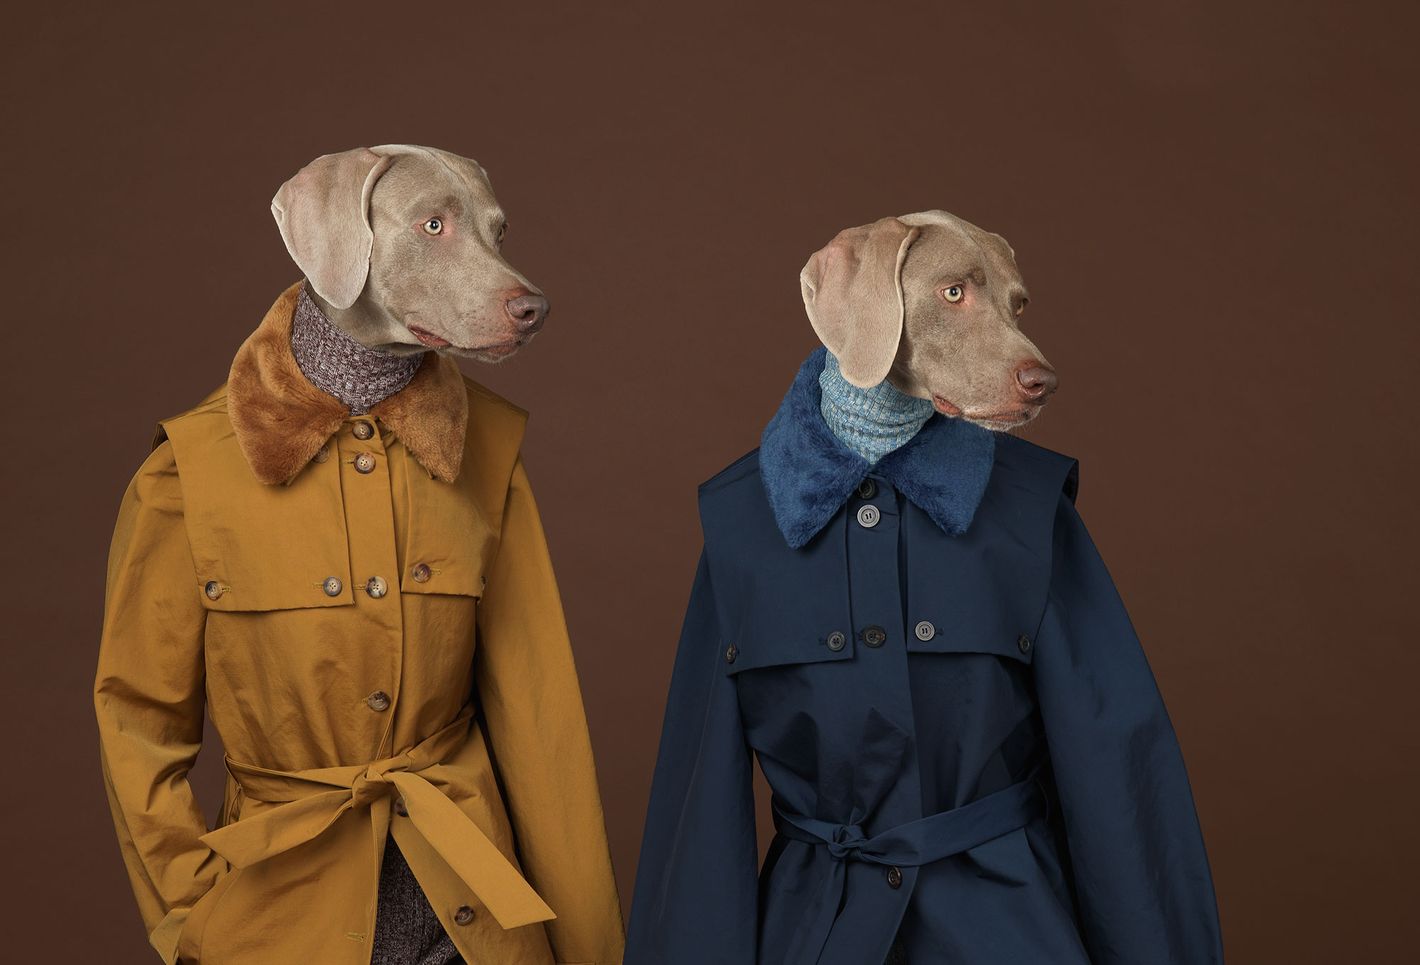 Books for Dog Lovers, Dogs Wearing Clothes, Pet Book Being Human: William Wegman 